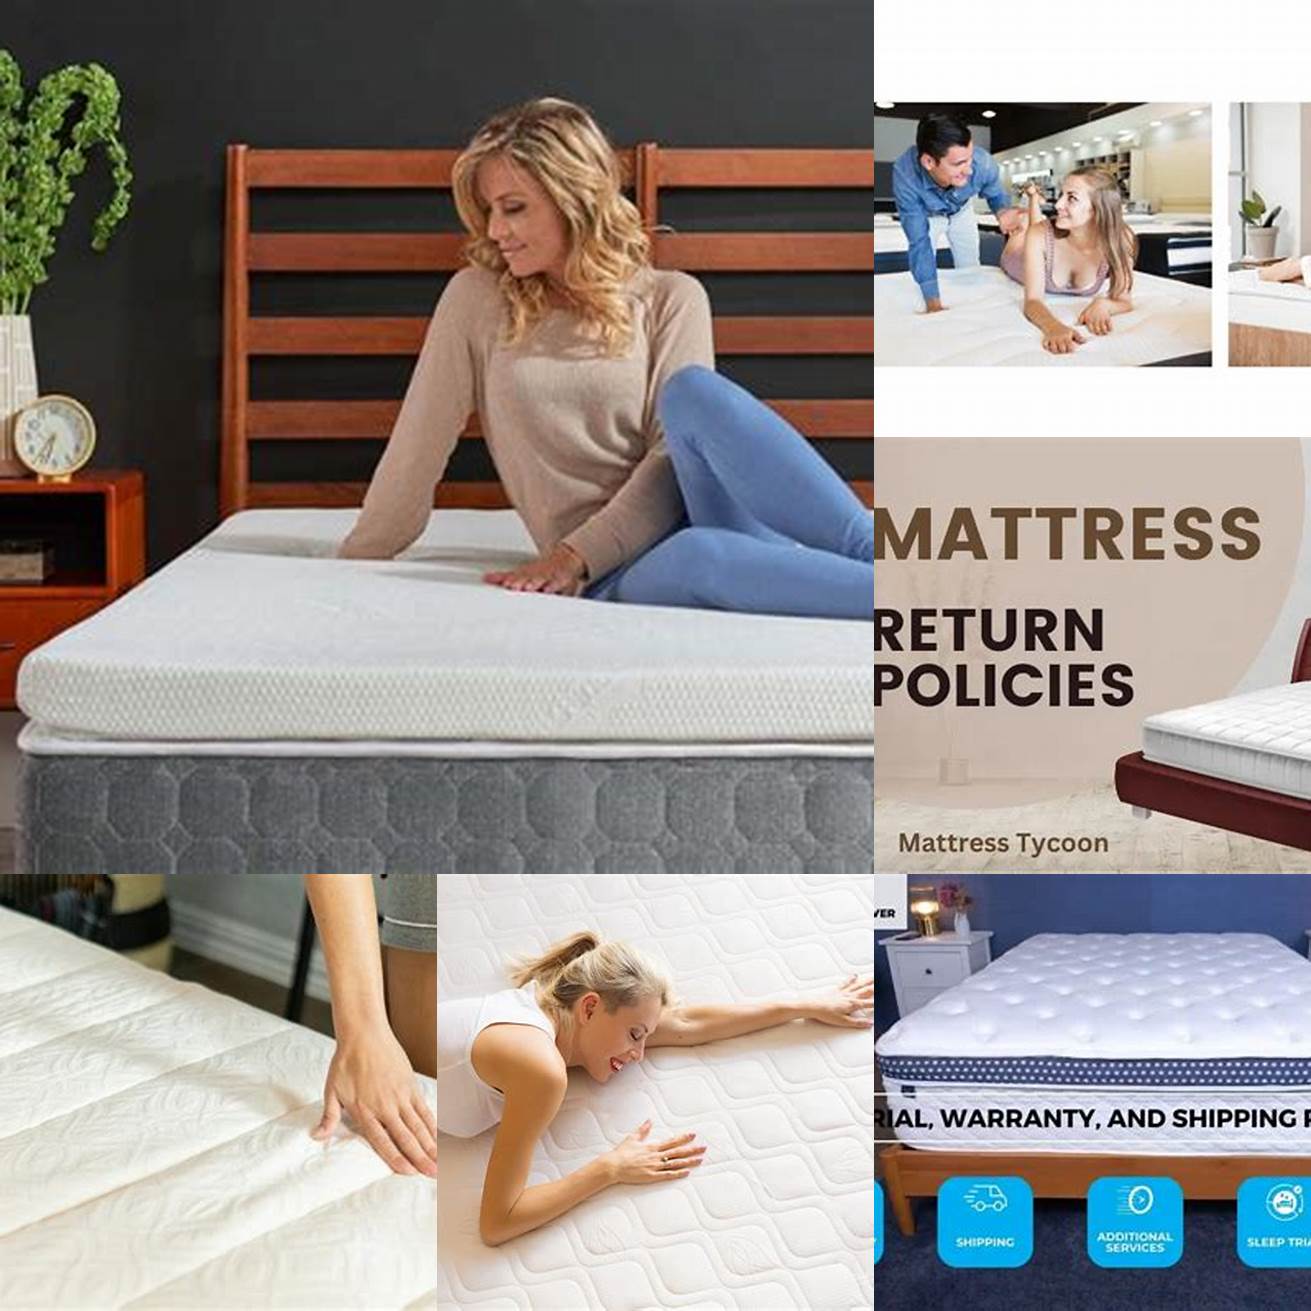 Take advantage of trial periods and return policies to make sure the mattress is right for you